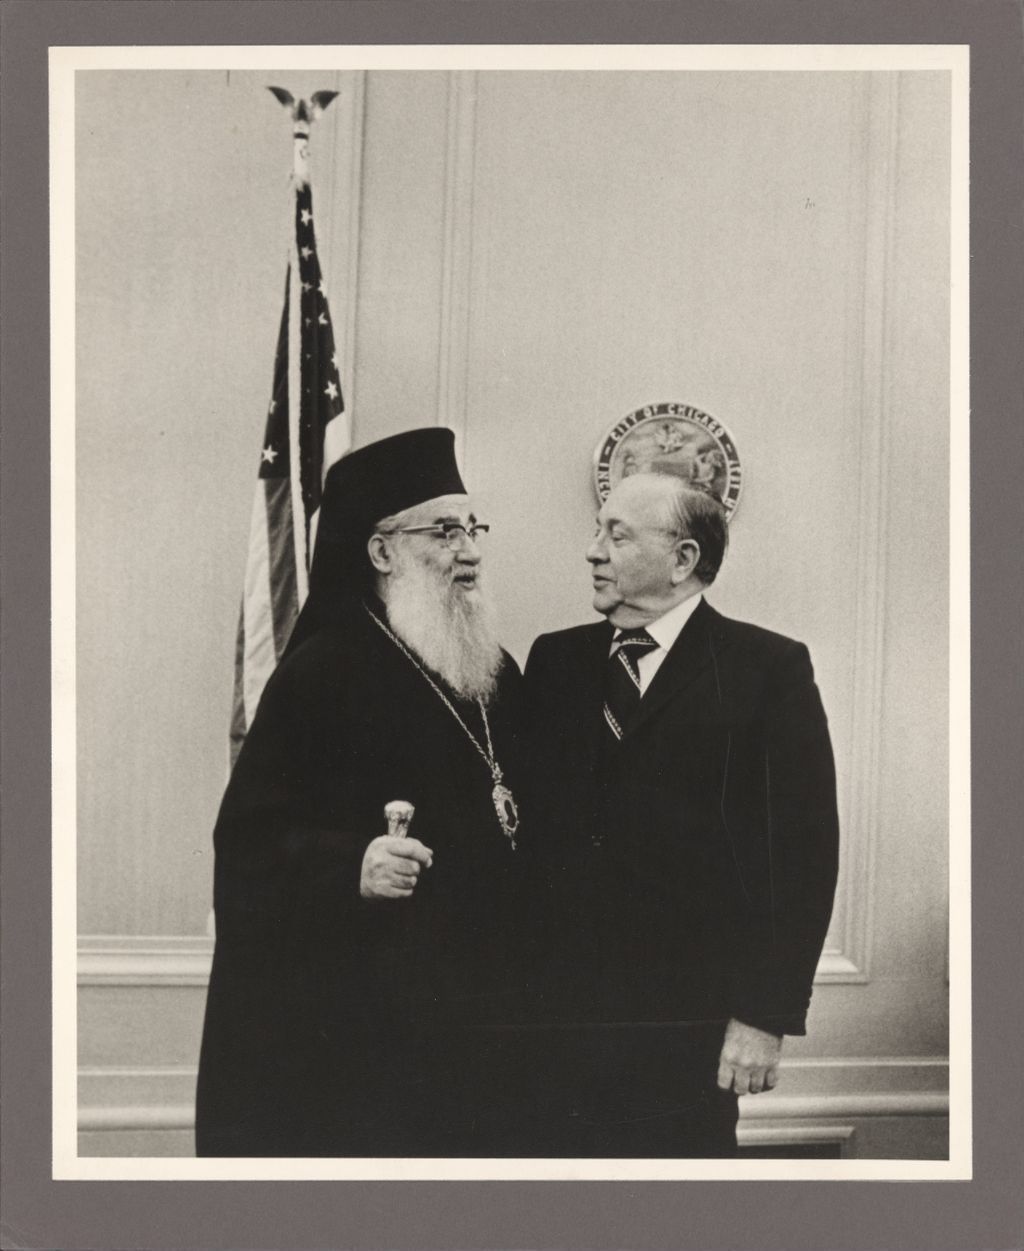 Miniature of Richard J. Daley with an Orthodox priest